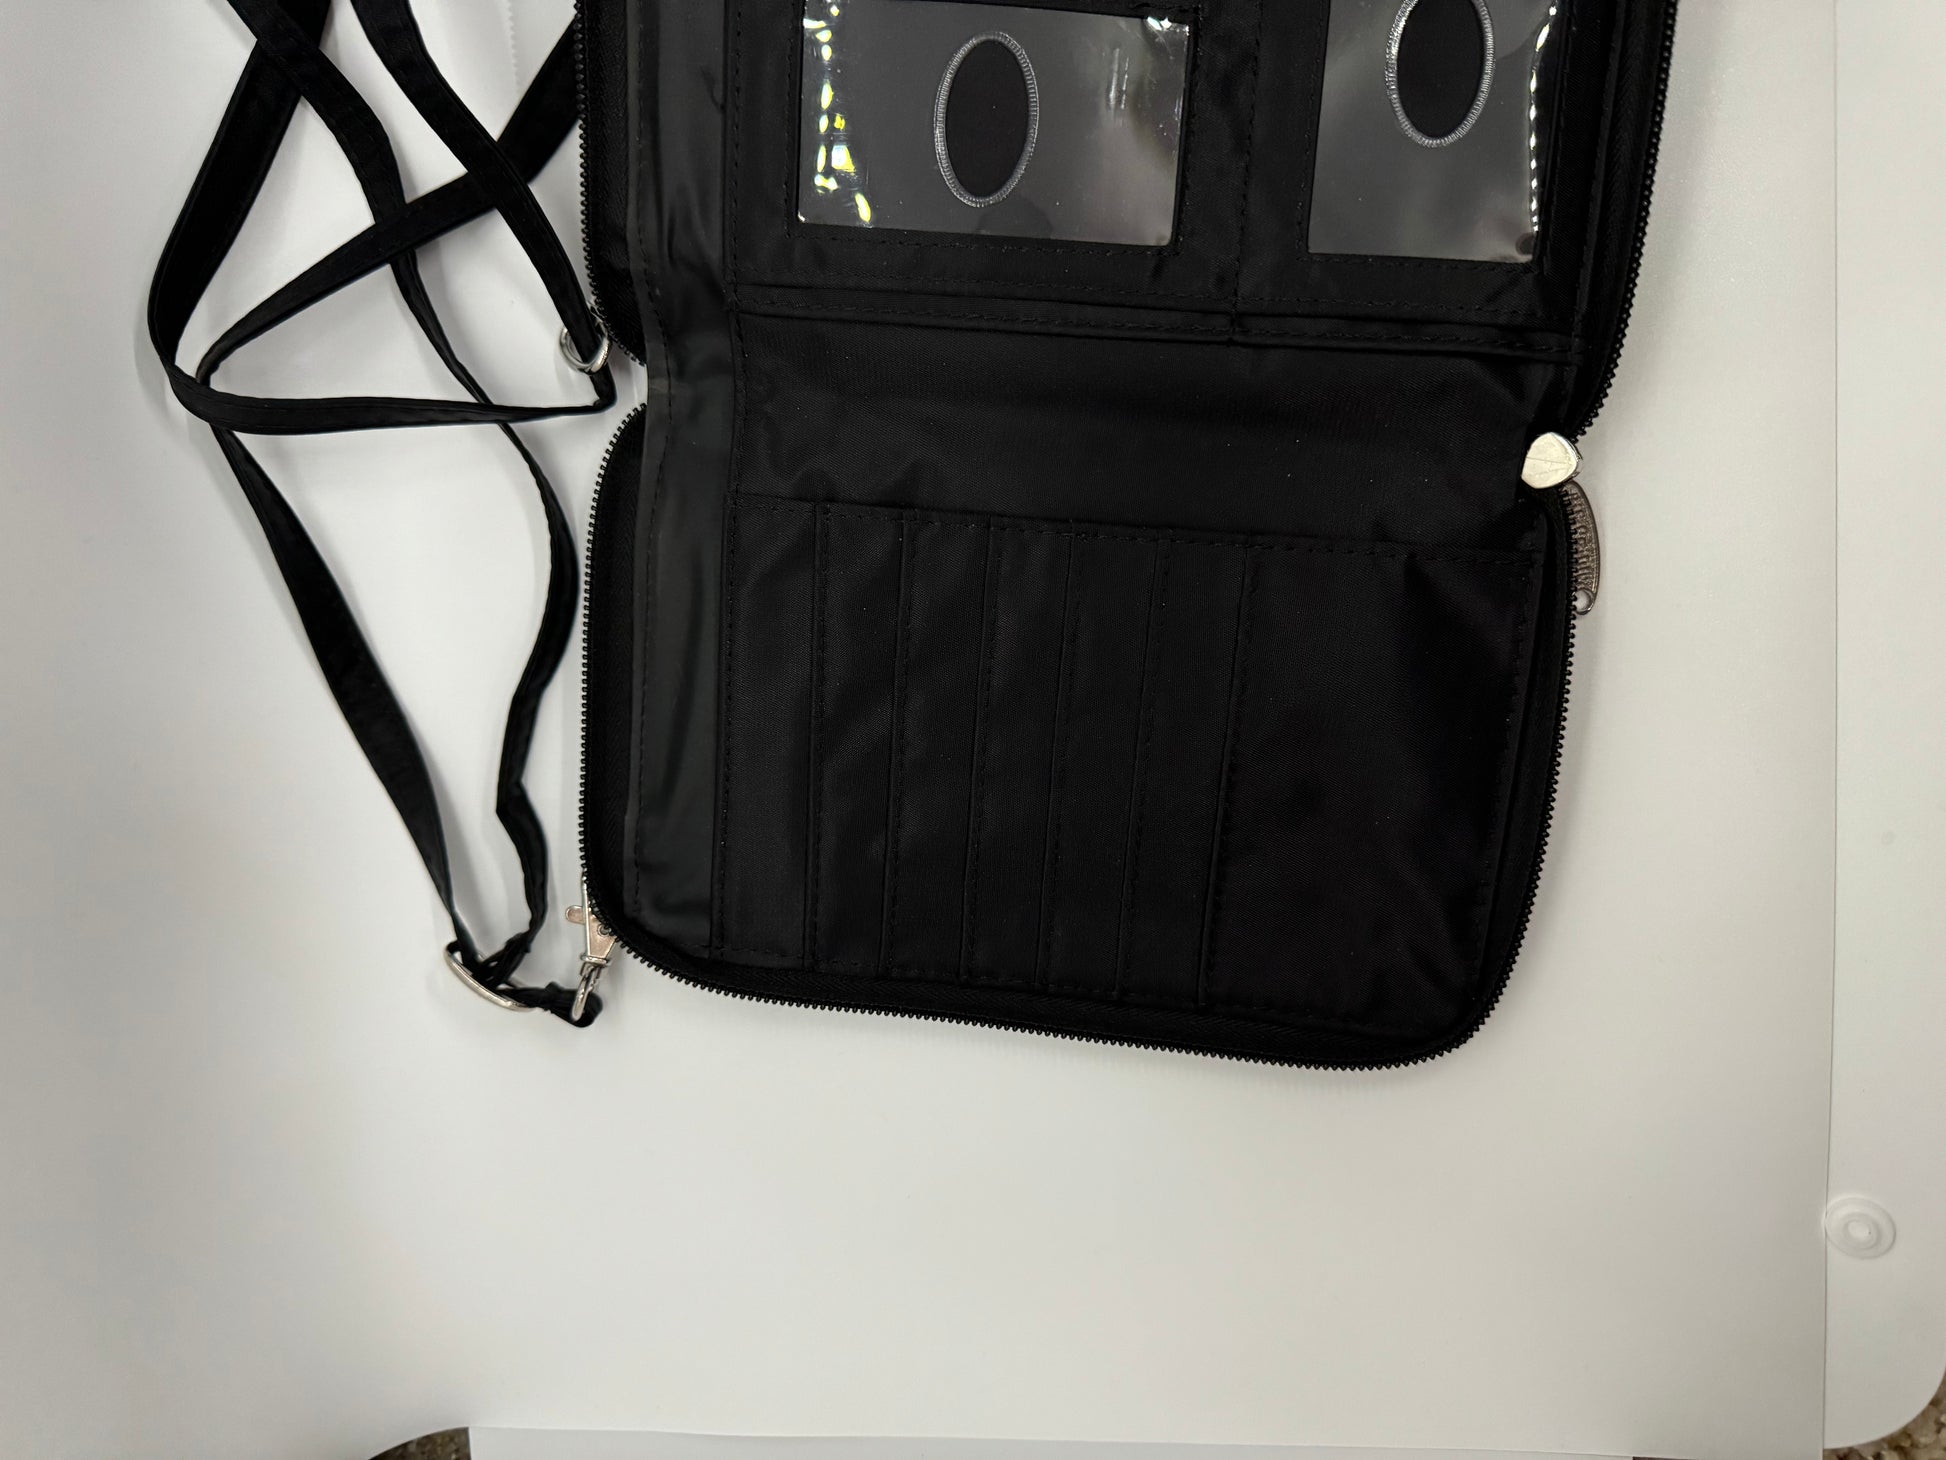 The picture shows a black wallet or organizer with a strap. The wallet is open and has multiple compartments. On the left side, there is a strap that is likely used to carry or secure the wallet. The strap is black and has a clip at the end. On the right side of the wallet, there are several vertical slots that can be used to store cards or other flat items. Above these slots, there is a zippered compartment. The zipper has a silver pull tab. The wallet also has a clear plastic section with three 